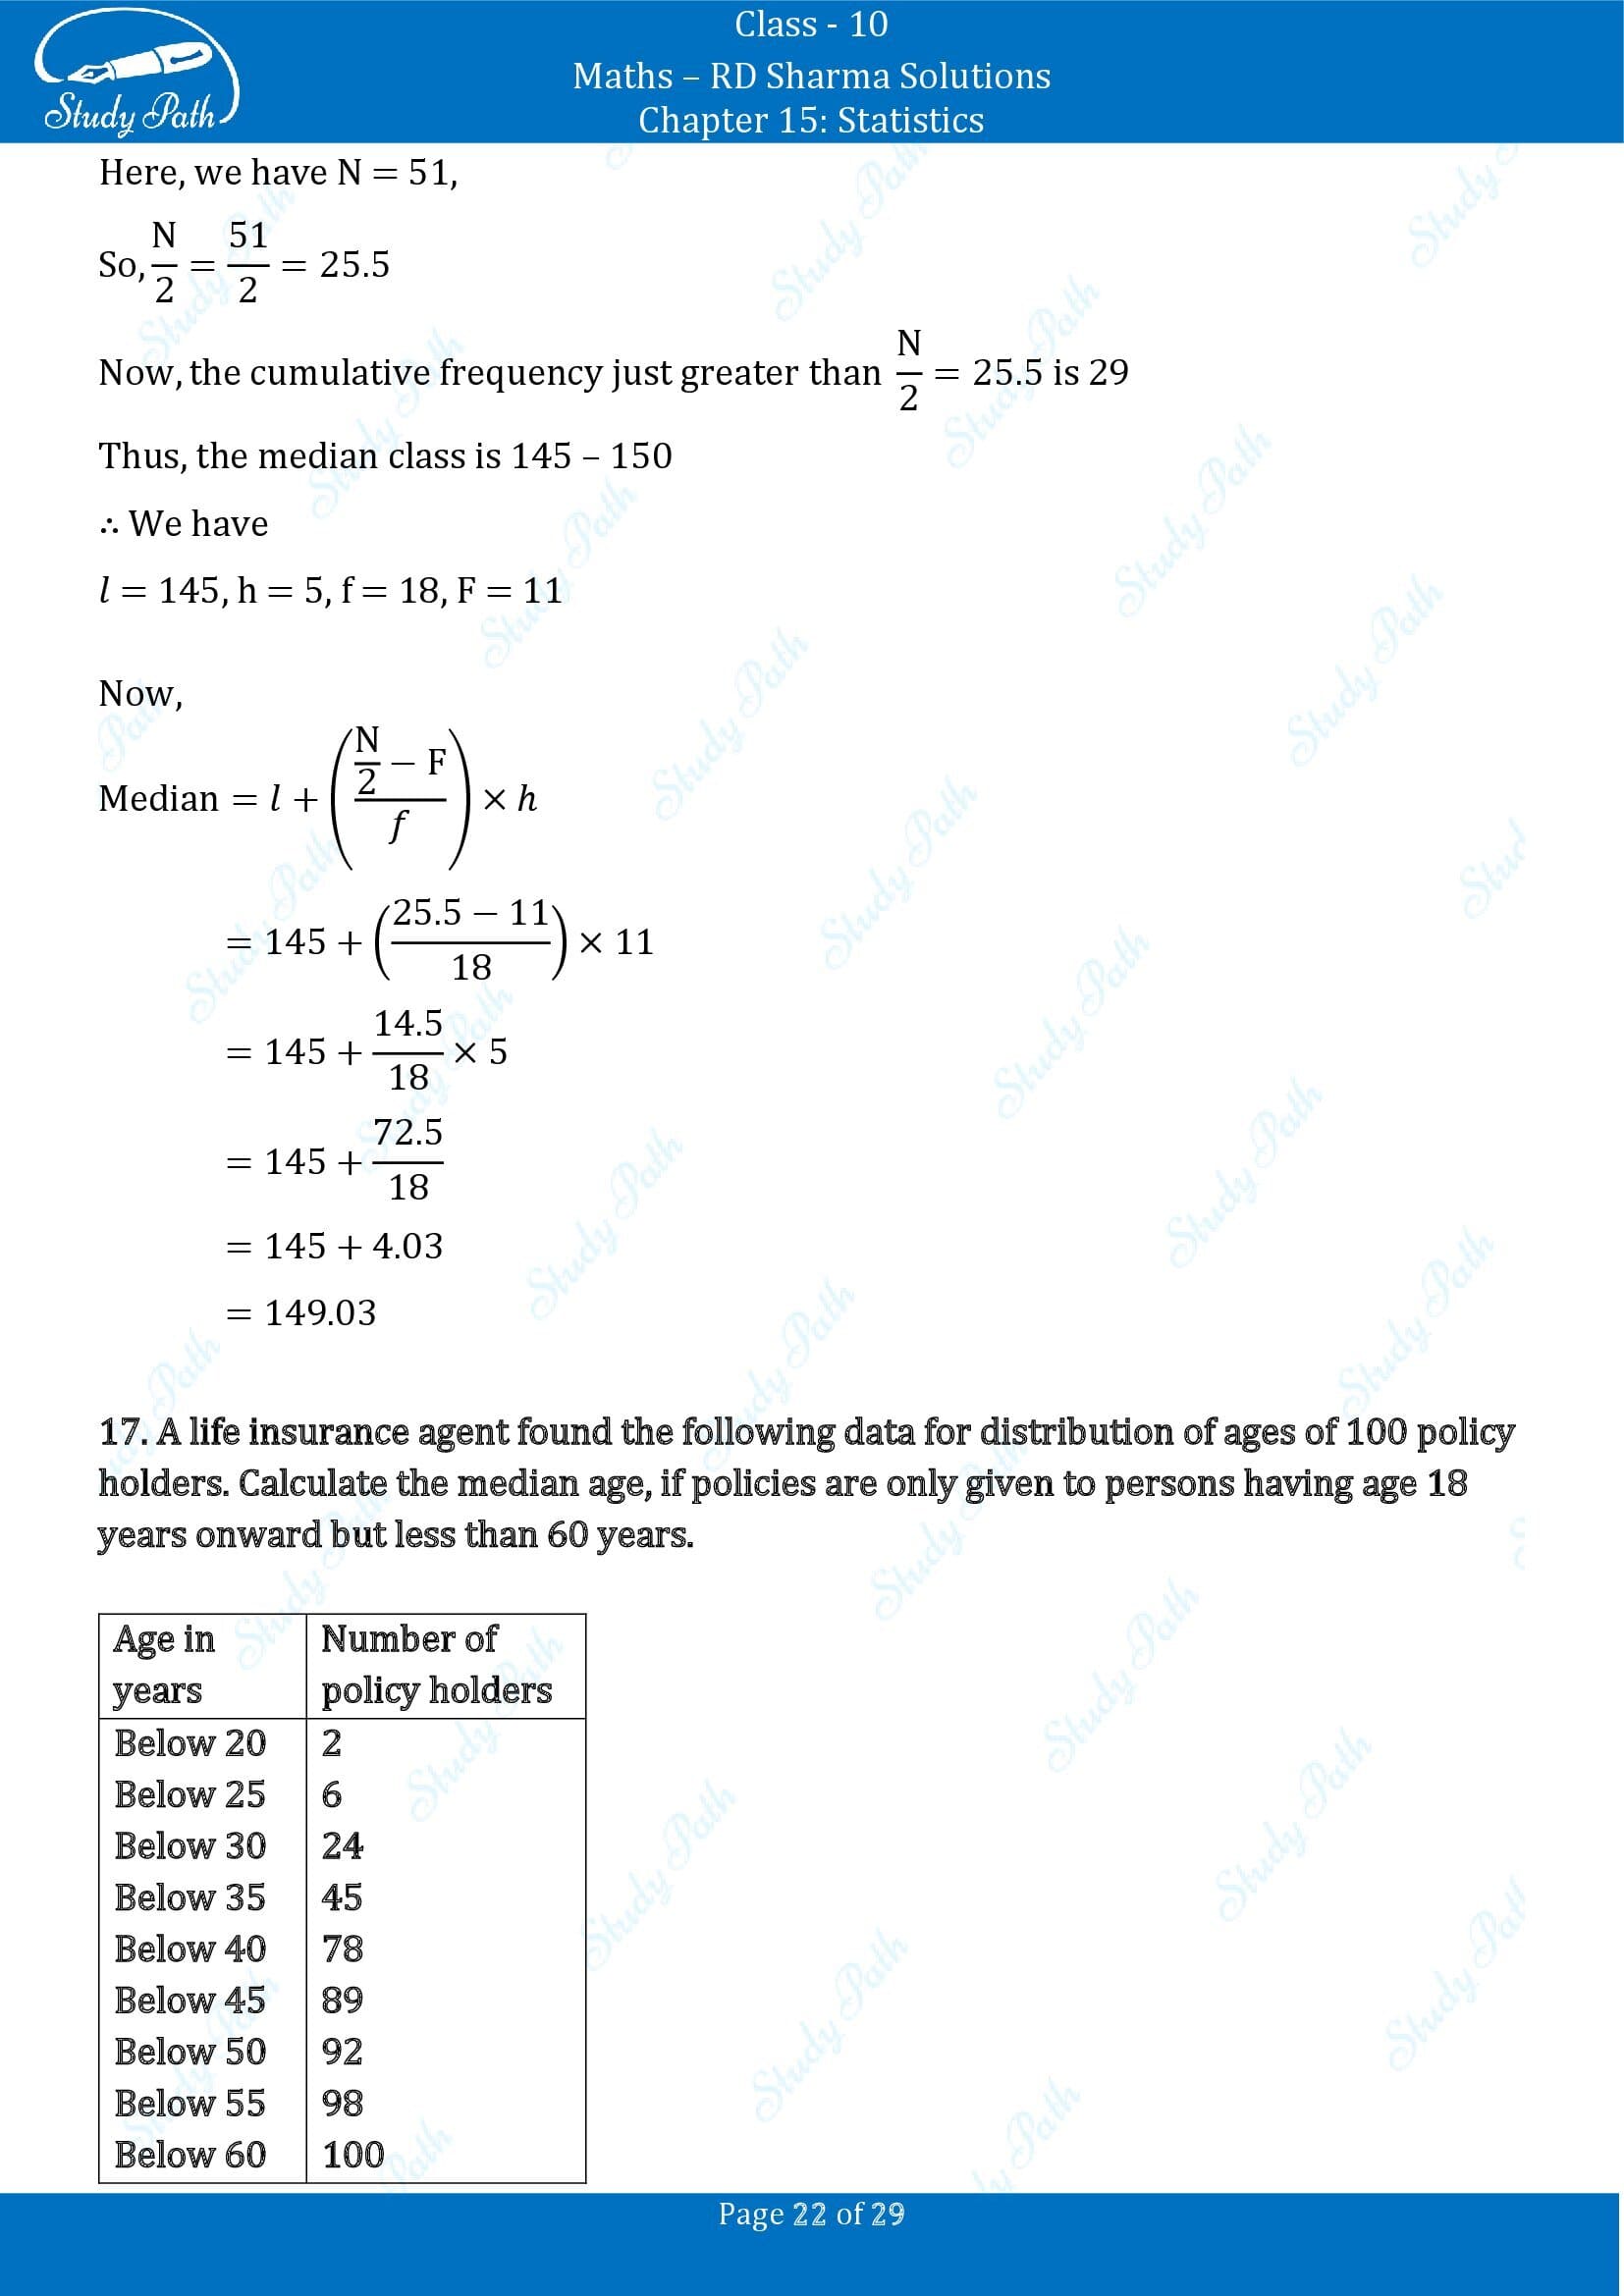 RD Sharma Solutions Class 10 Chapter 15 Statistics Exercise 15.4 00022